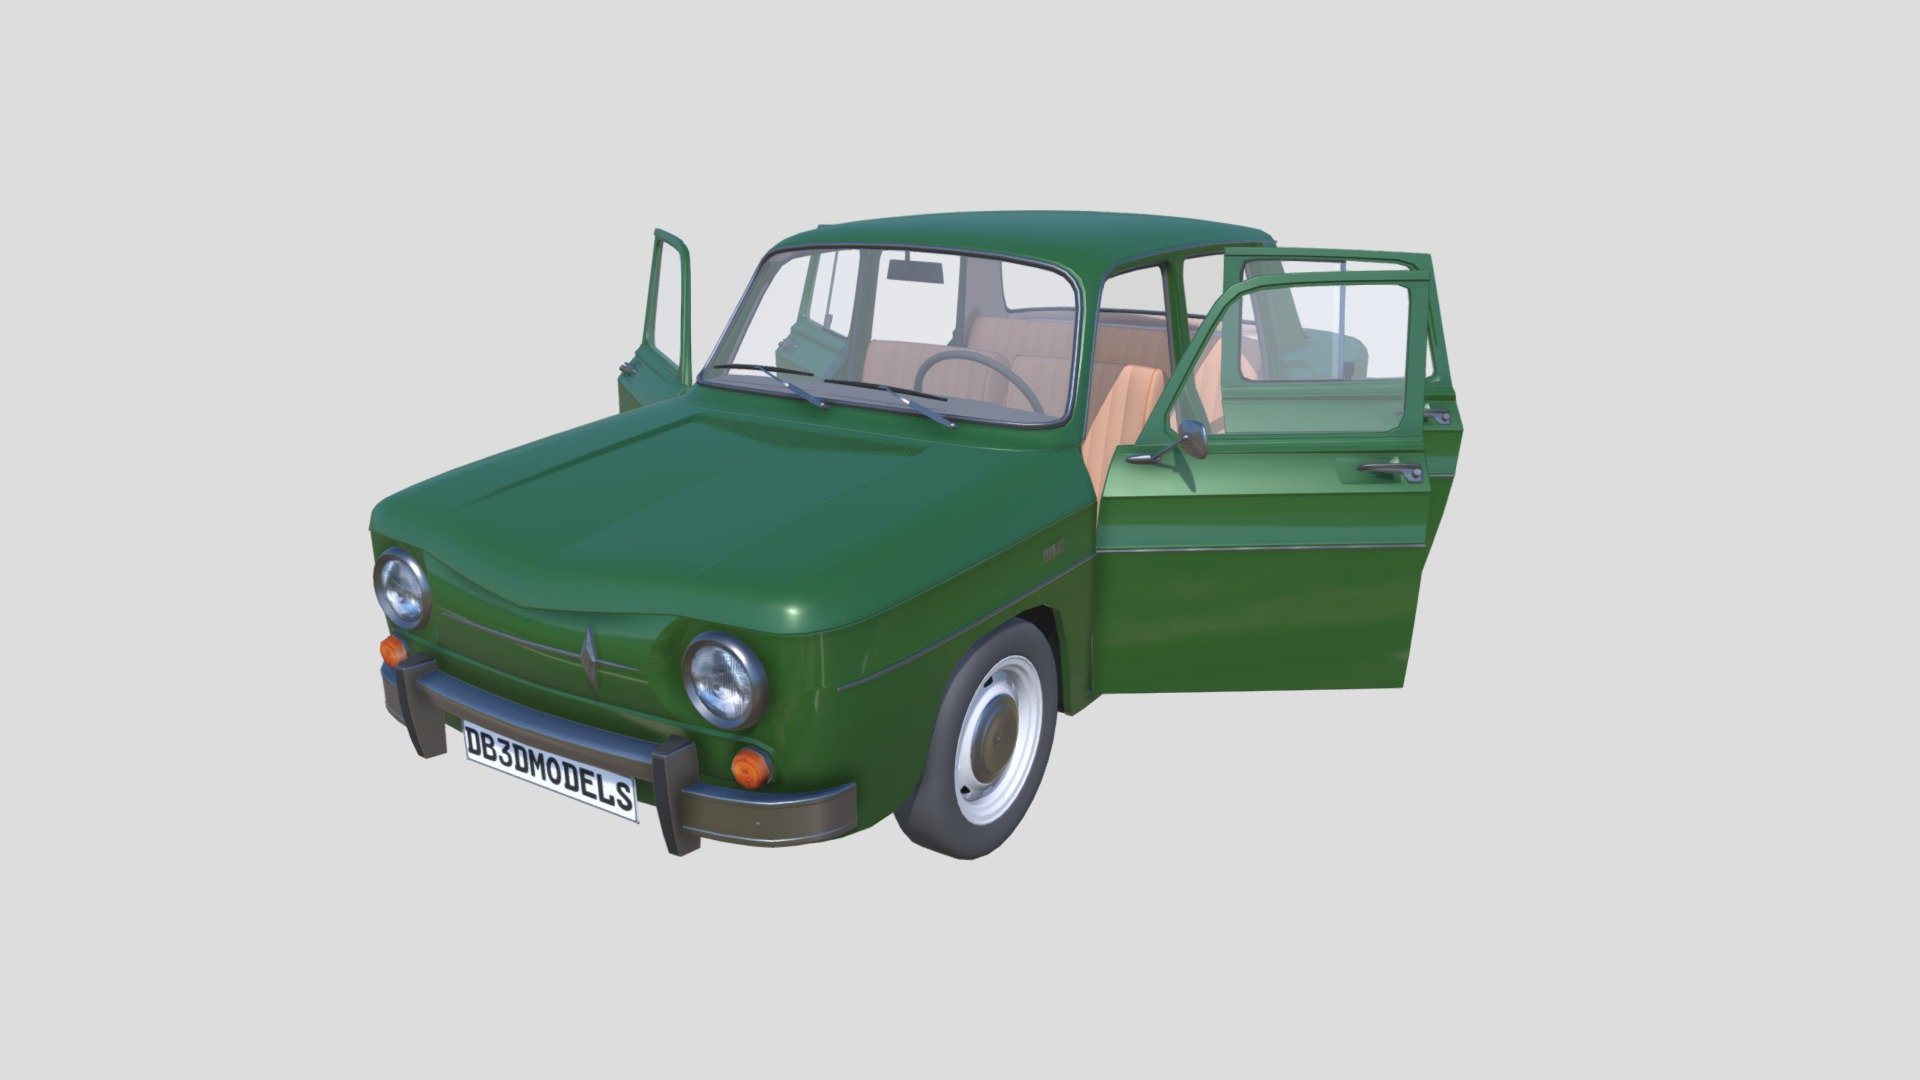 Highly detailed Renault 8 with a detailed interior 3d model rendered with Cycles in Blender, as per seen on attached images. 
The 3d model is scaled to original size in Blender.

File formats:
-.blend, rendered with cycles, as seen in the images;
-.blend, open, rendered with cycles, as seen in the images;
-.obj, with materials applied;
-.obj, open, with materials applied;
-.dae, with materials applied;
-.dae, open, with materials applied;
-.fbx, with materials applied;
-.fbx, open, with materials applied;
-.stl;
-.stl, open;

Files come named appropriately and split by file format.

3D Software:
The 3D model was originally created in Blender 2.8 and rendered with Cycles.

Materials and textures:
The models have materials applied in all formats, and are ready to import and render.
The models come with two png textures, one for the car lights, interior details, and one for the number plates.

General:
The models are built mostly out of quads and are subdivisable 3d model